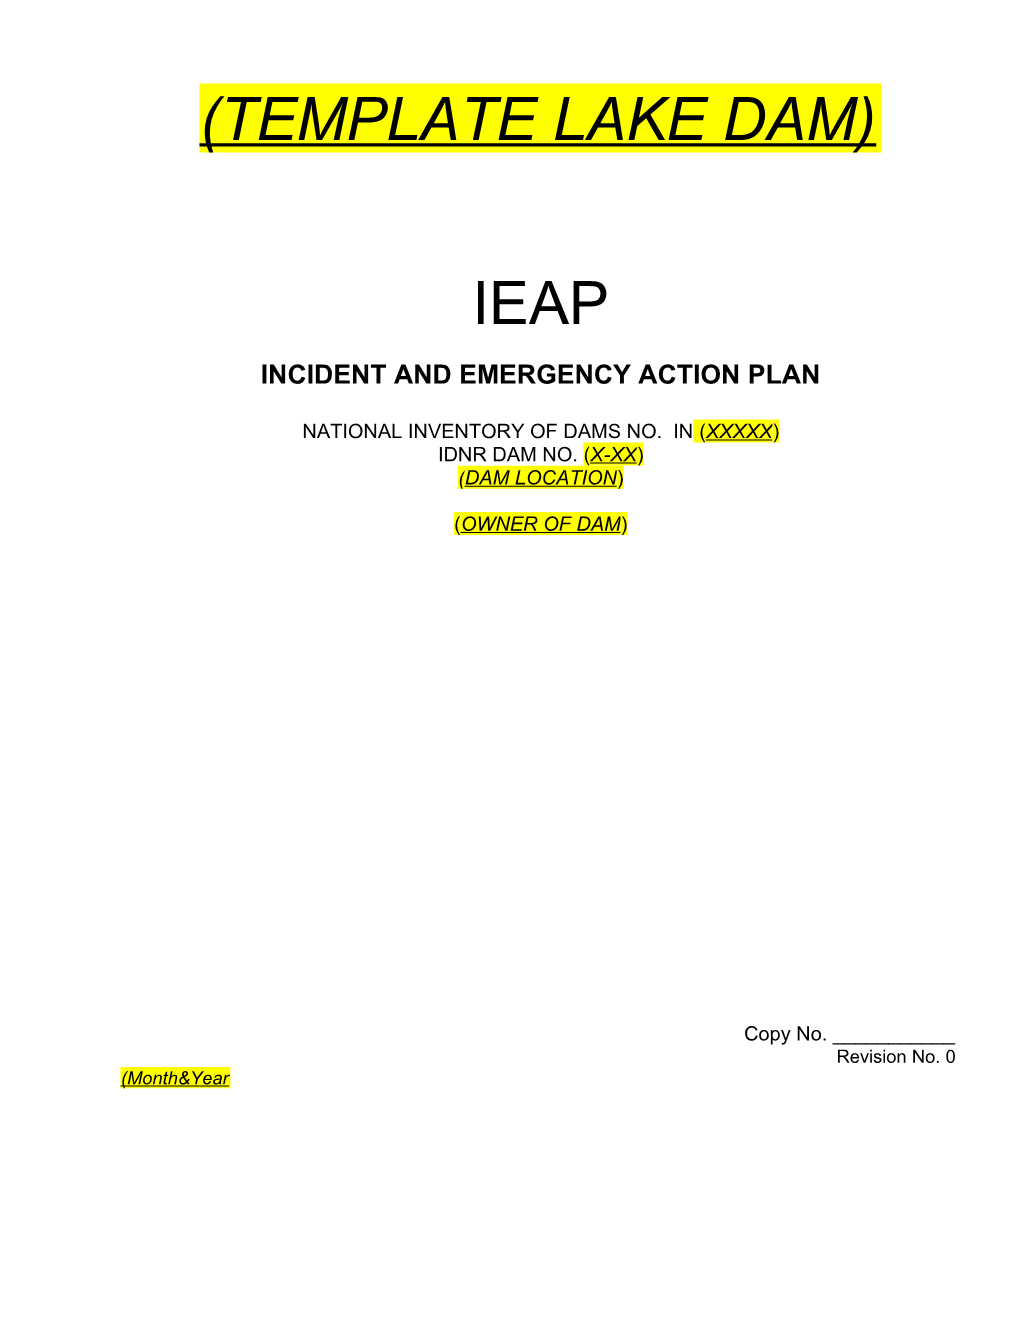 Emergency Action Plan s1